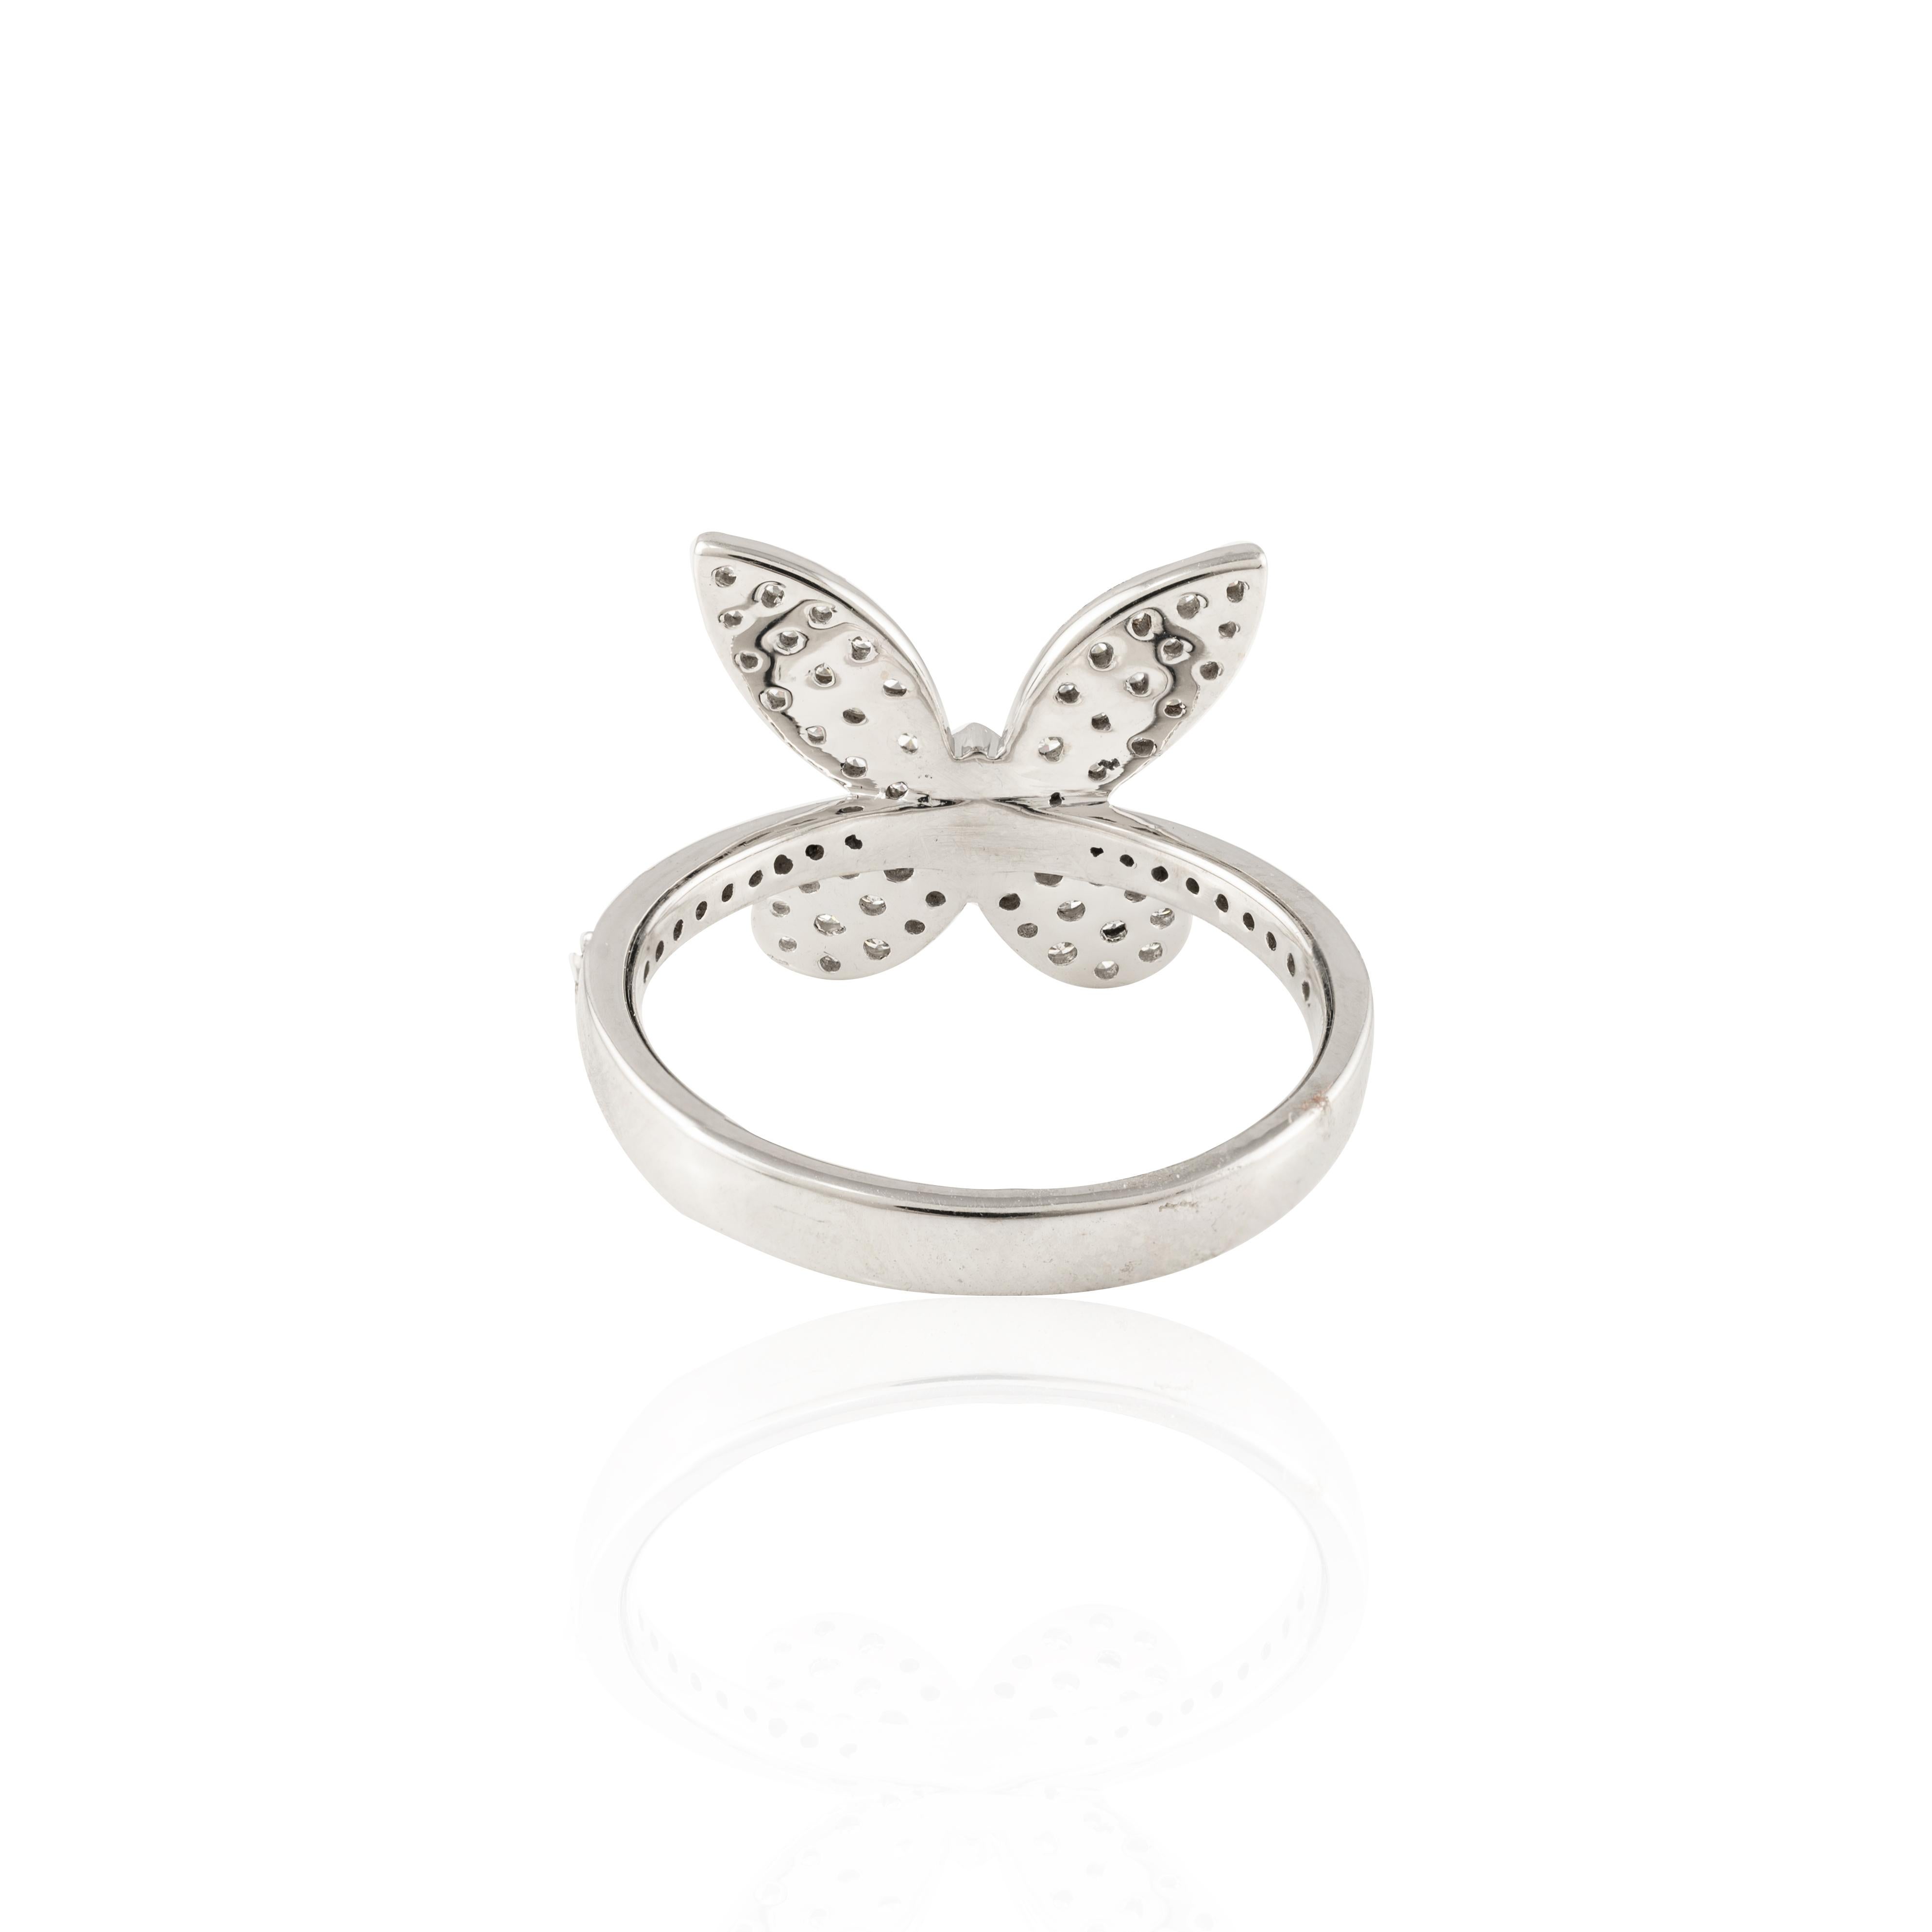 For Sale:   18 Karat Solid White Gold 0.63 Carats Brilliant Diamond Butterfly Ring 6